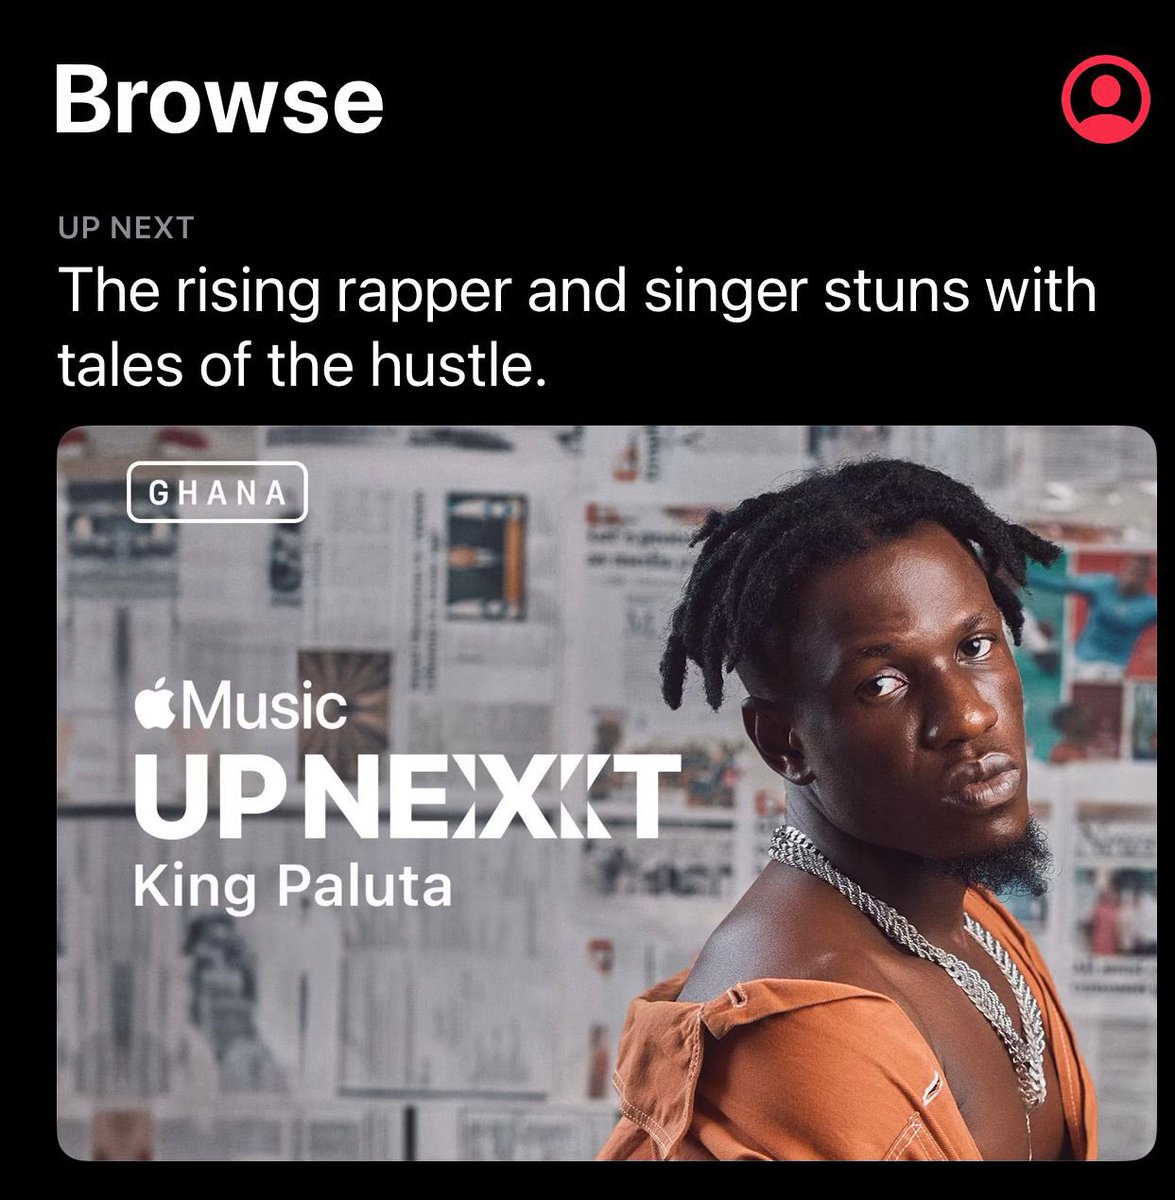 Apple Music announces .@KingPalutaMusic as their “UP NEXT” artist for the Month